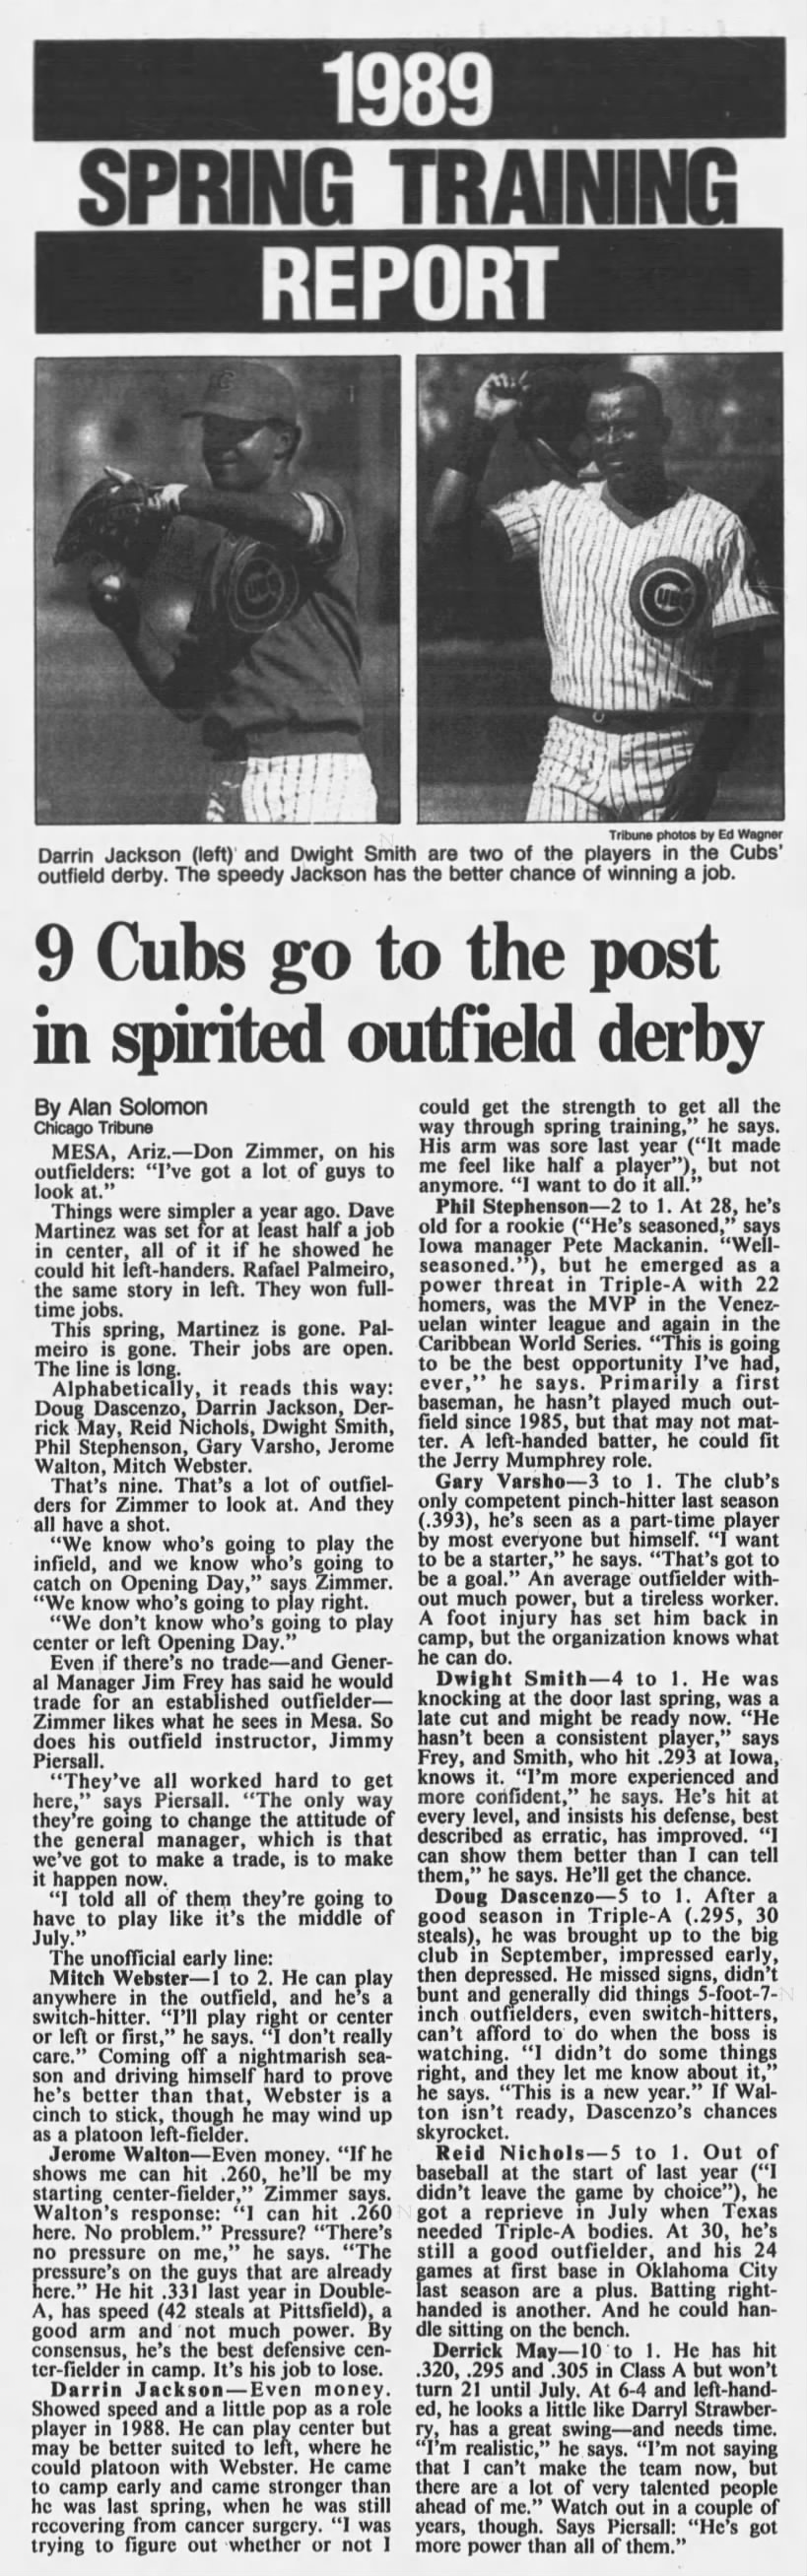 9 Cubs go to the post in spirited outfield derby